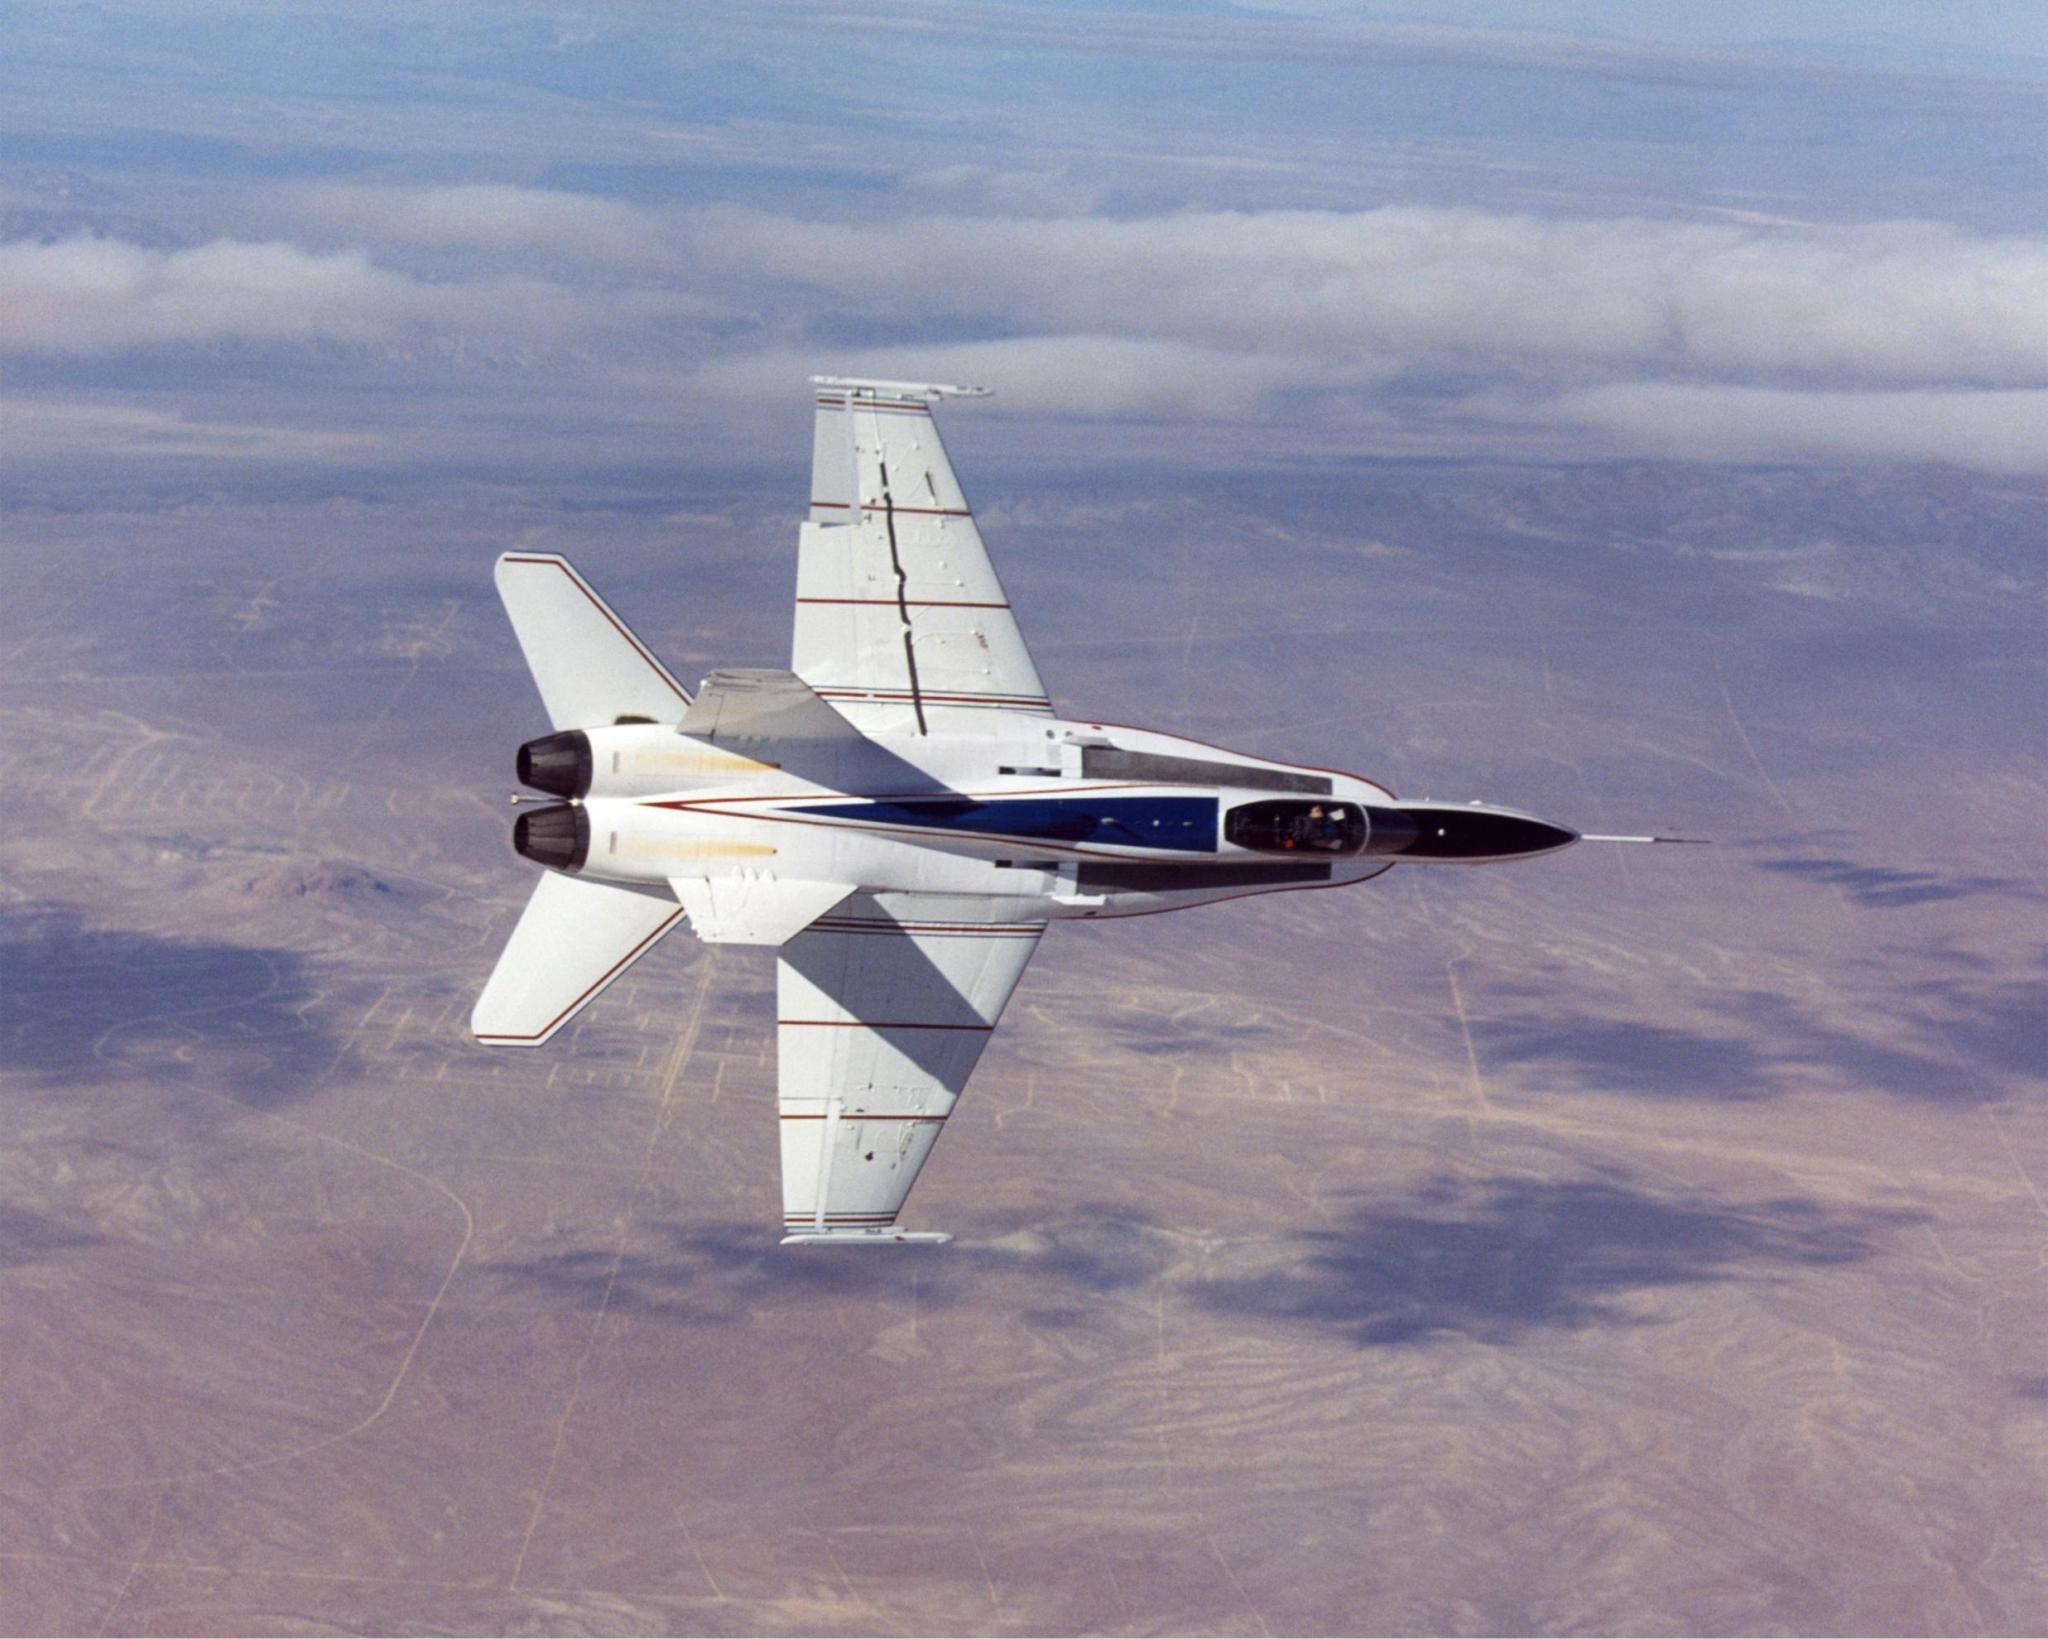 A top view of the F/A-18A aircraft during flight.